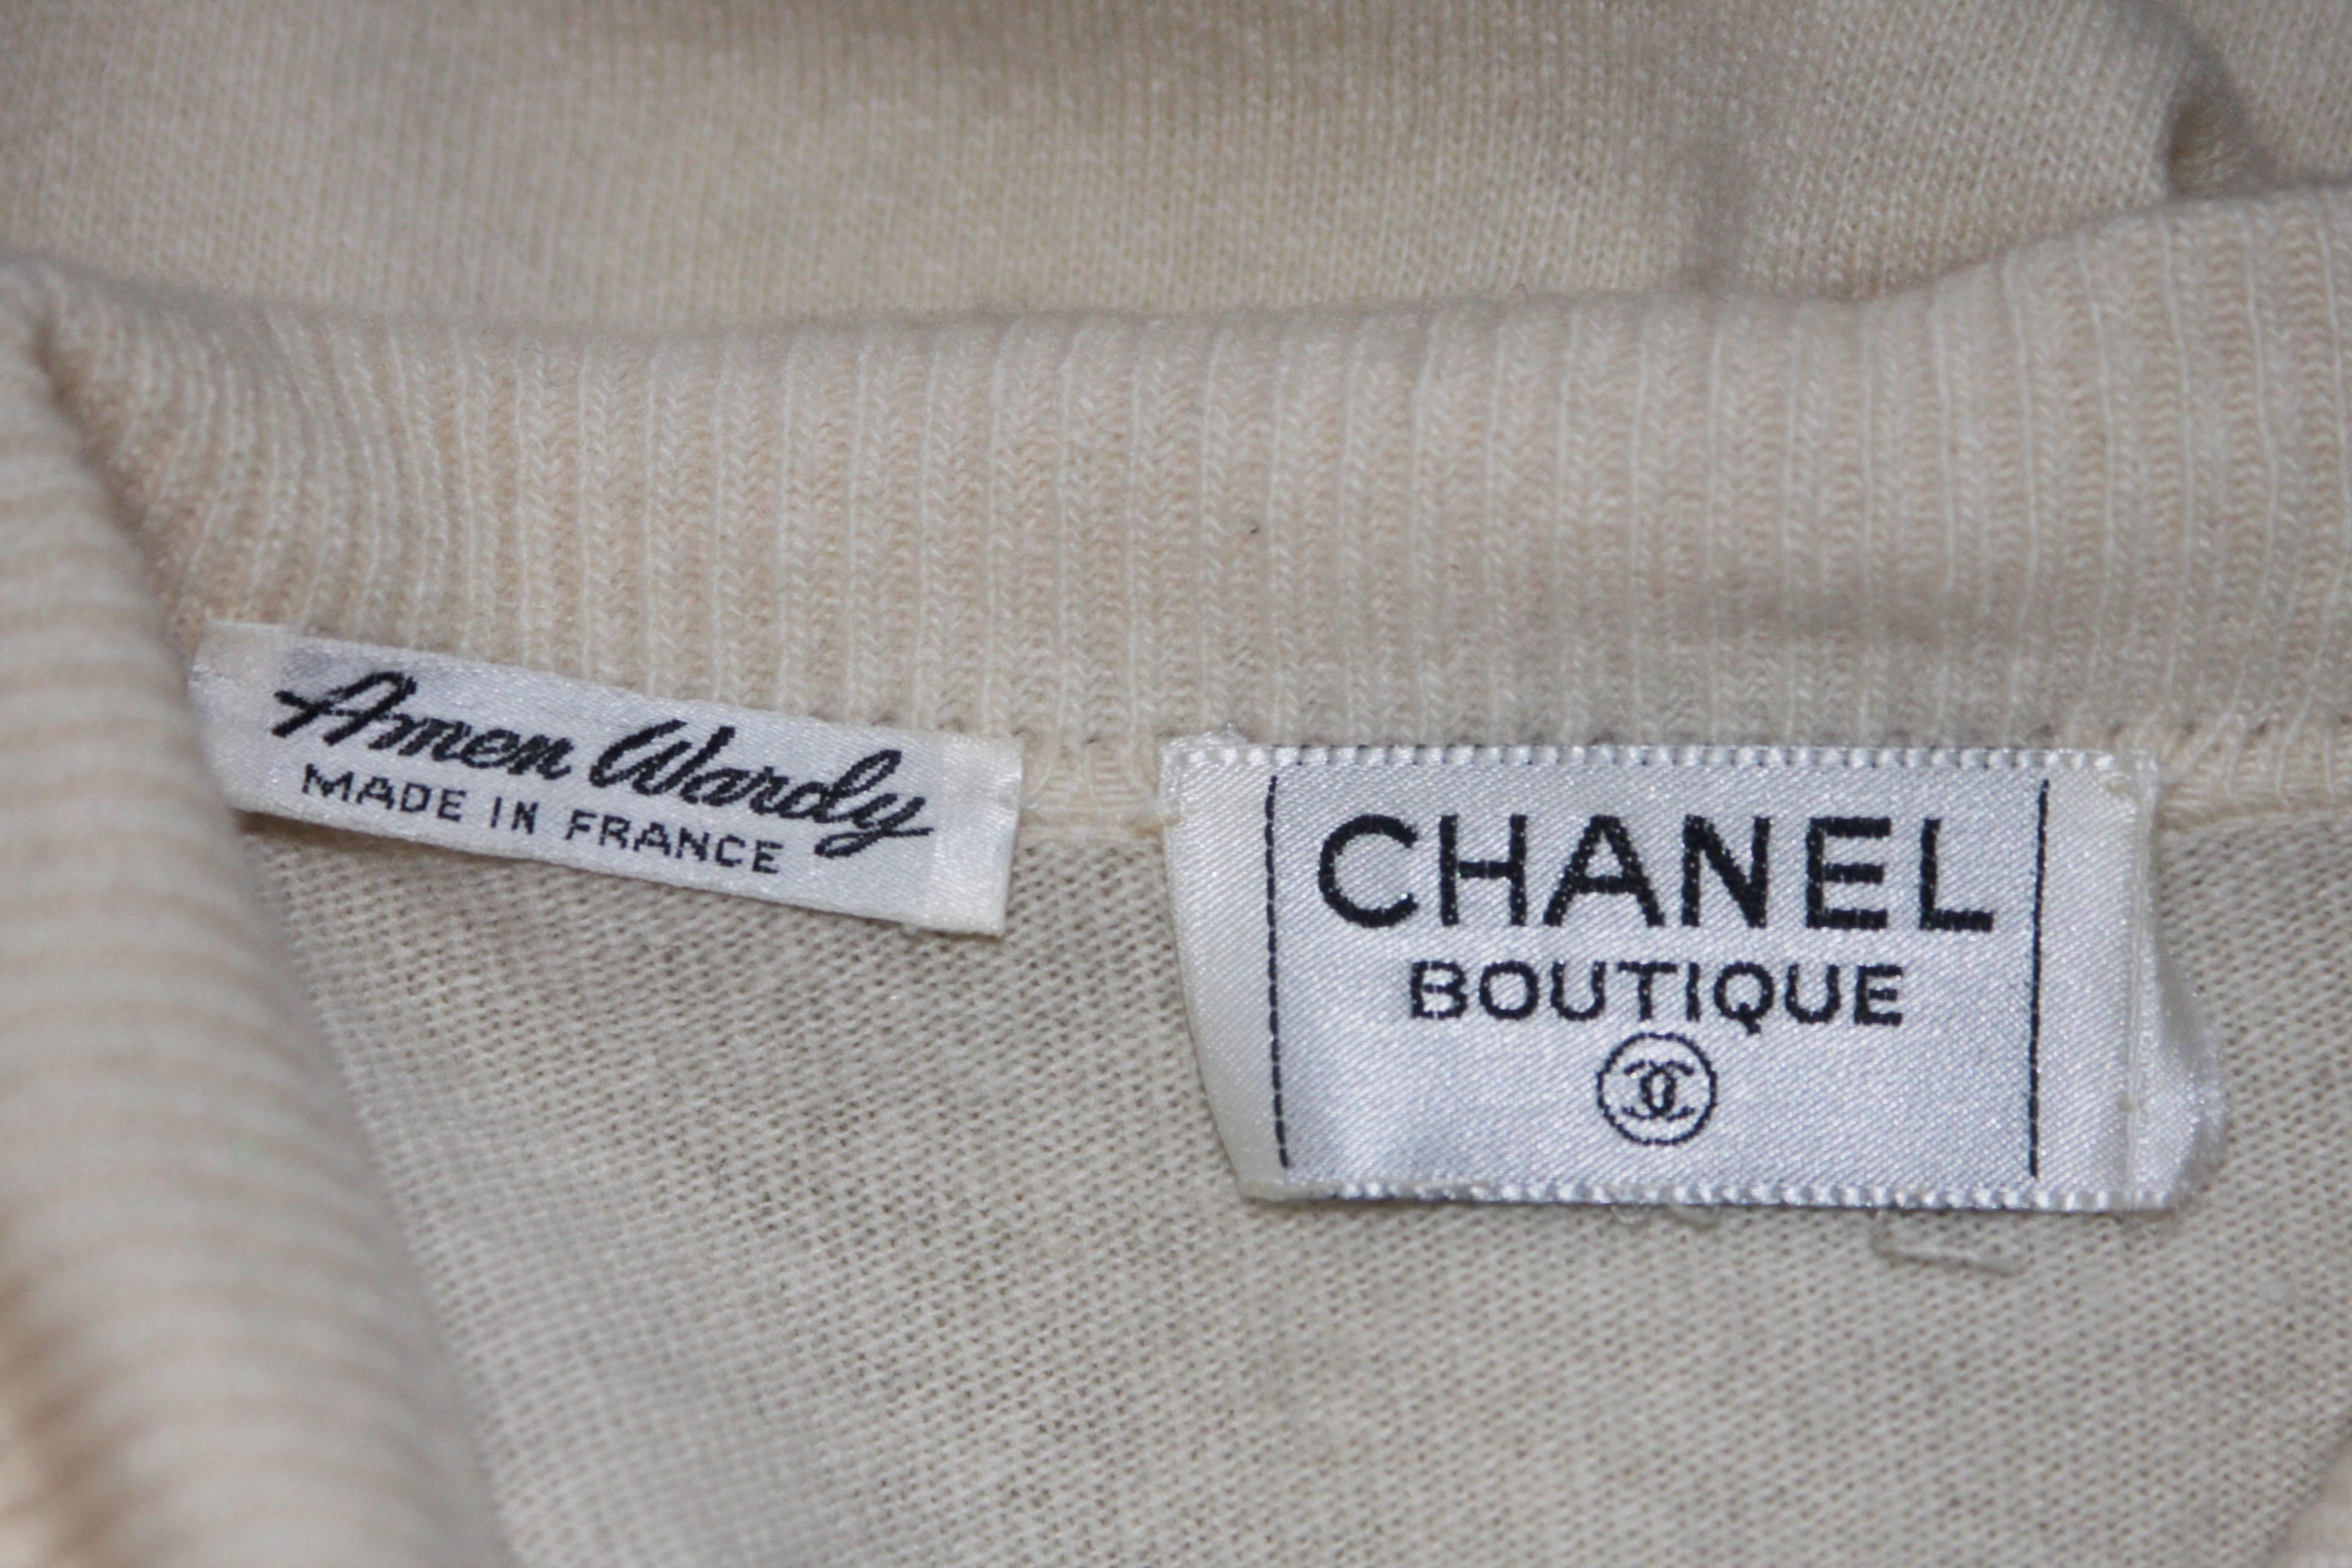 CHANEL Cream Cashmere Pull over Sweater with Gold Coin Buttons Size 38 3